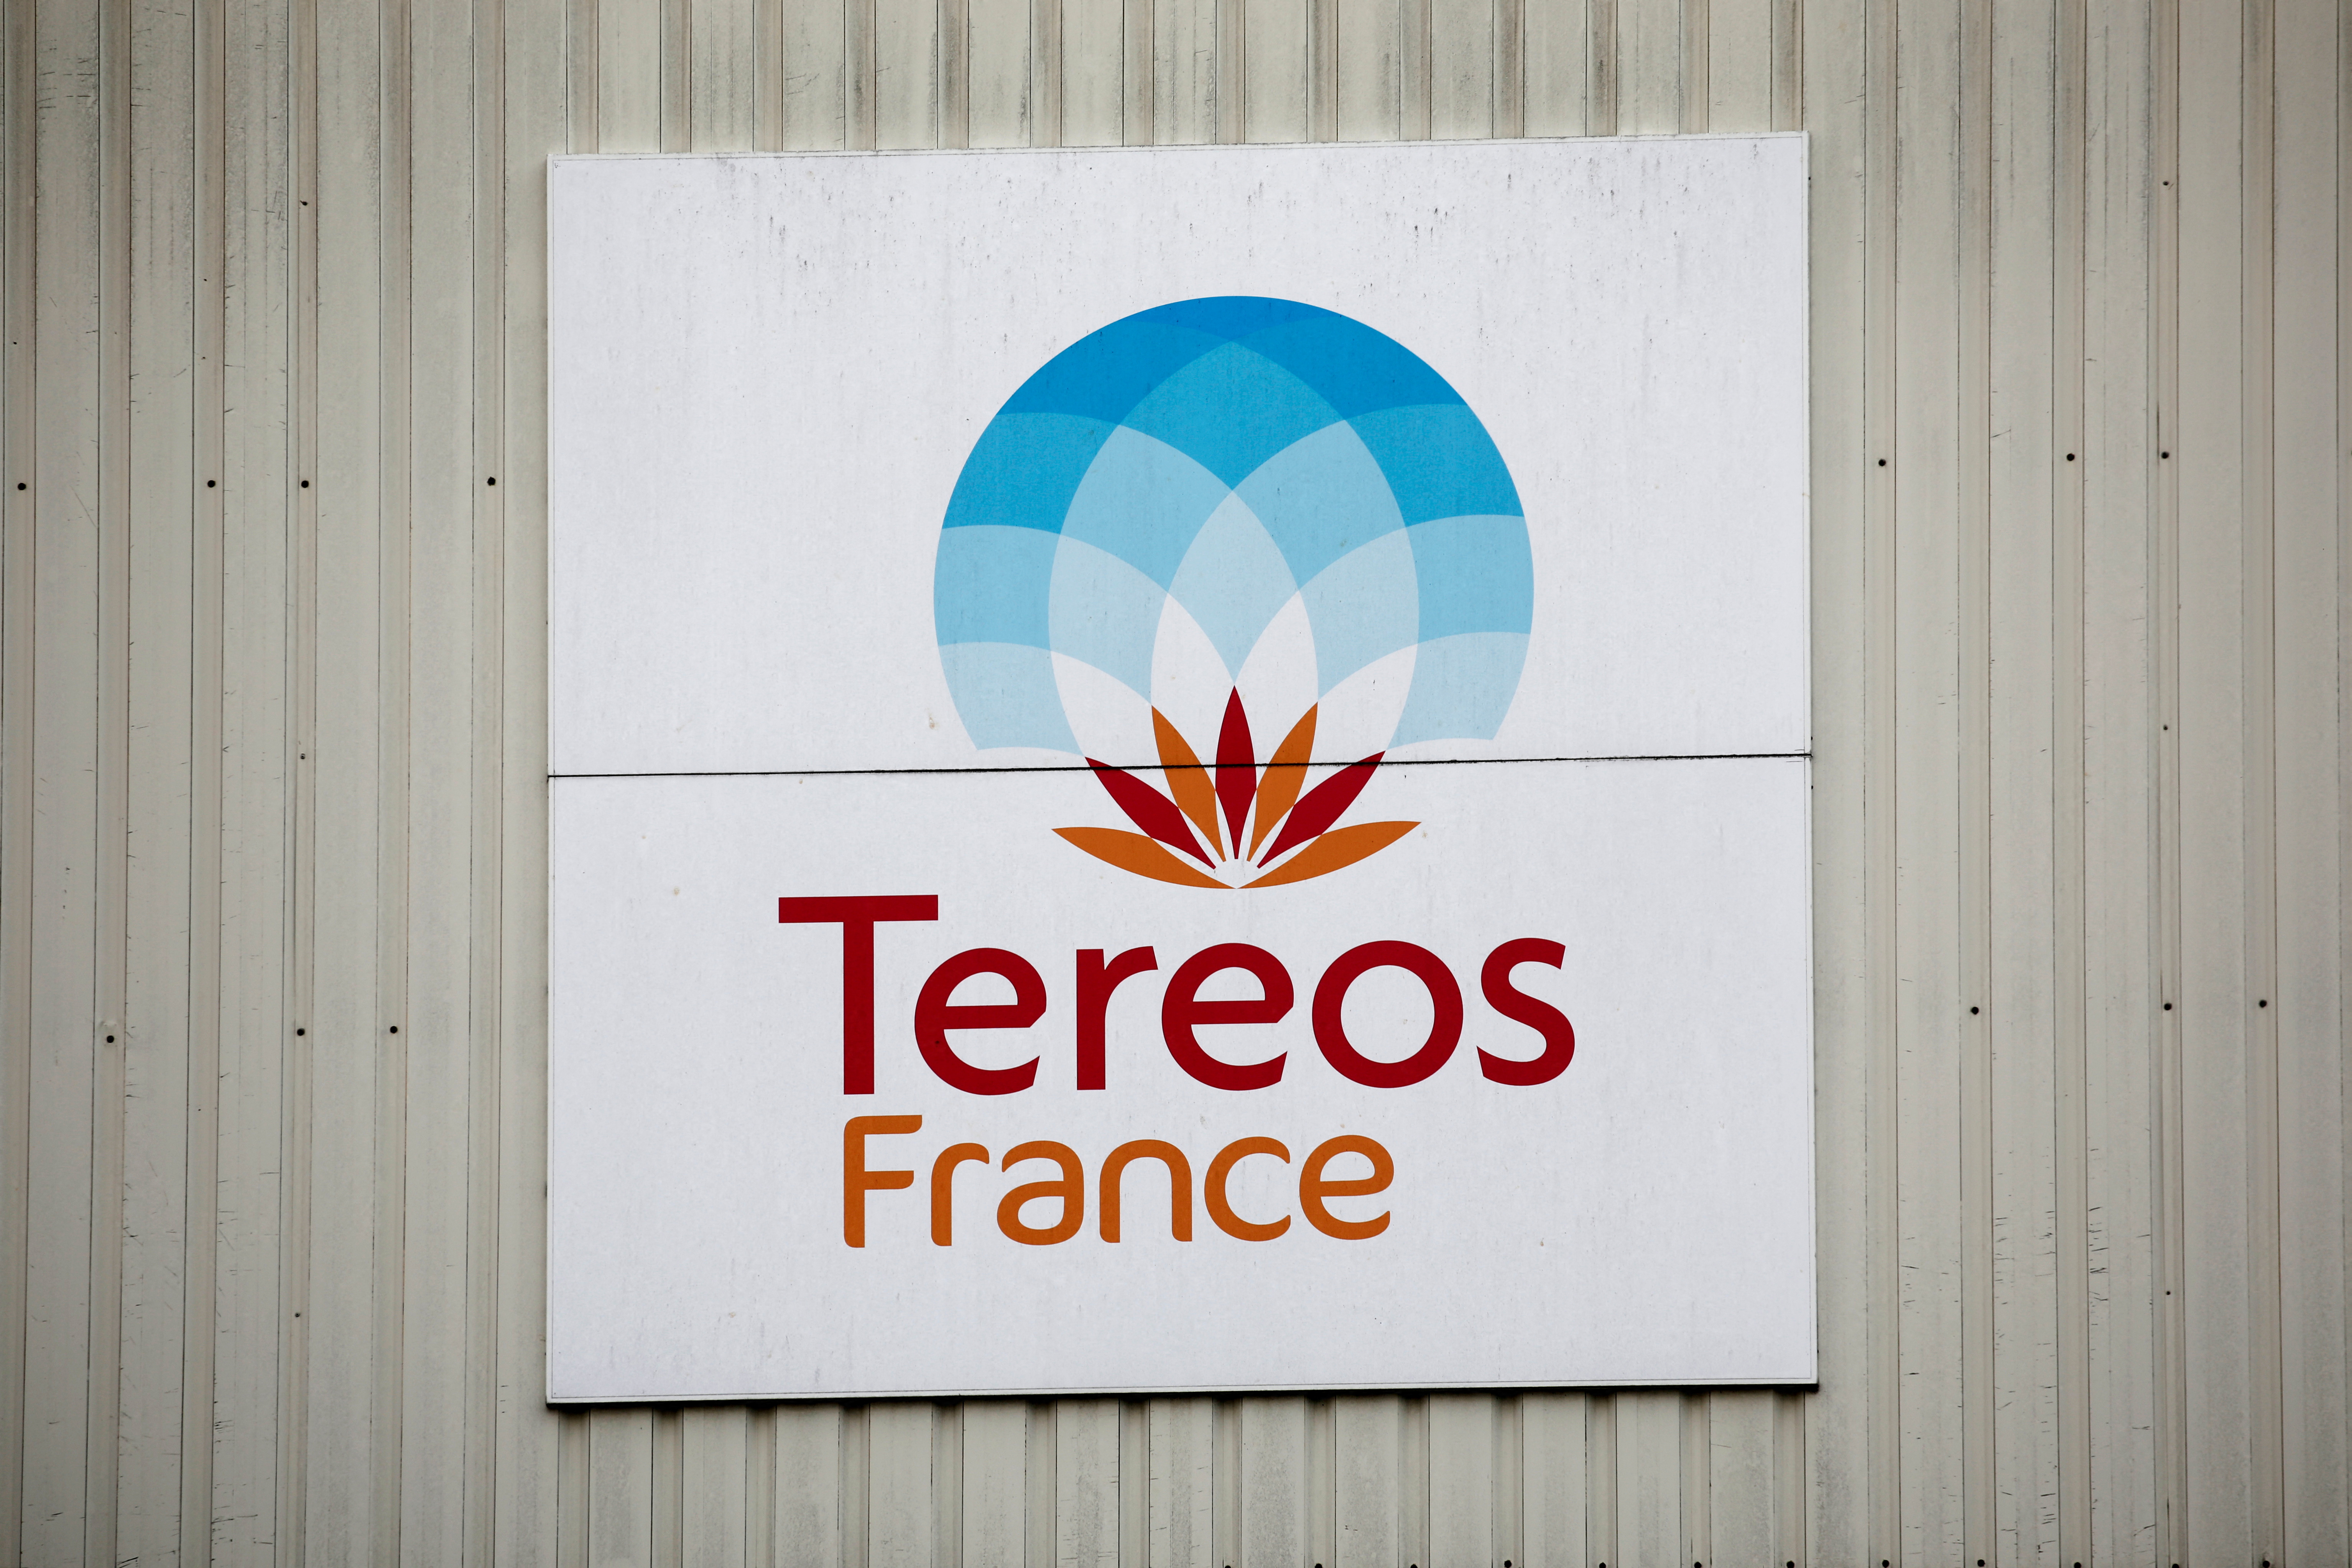 The Tereos logo is displayed at a sugar beet processing plant in Chevrieres